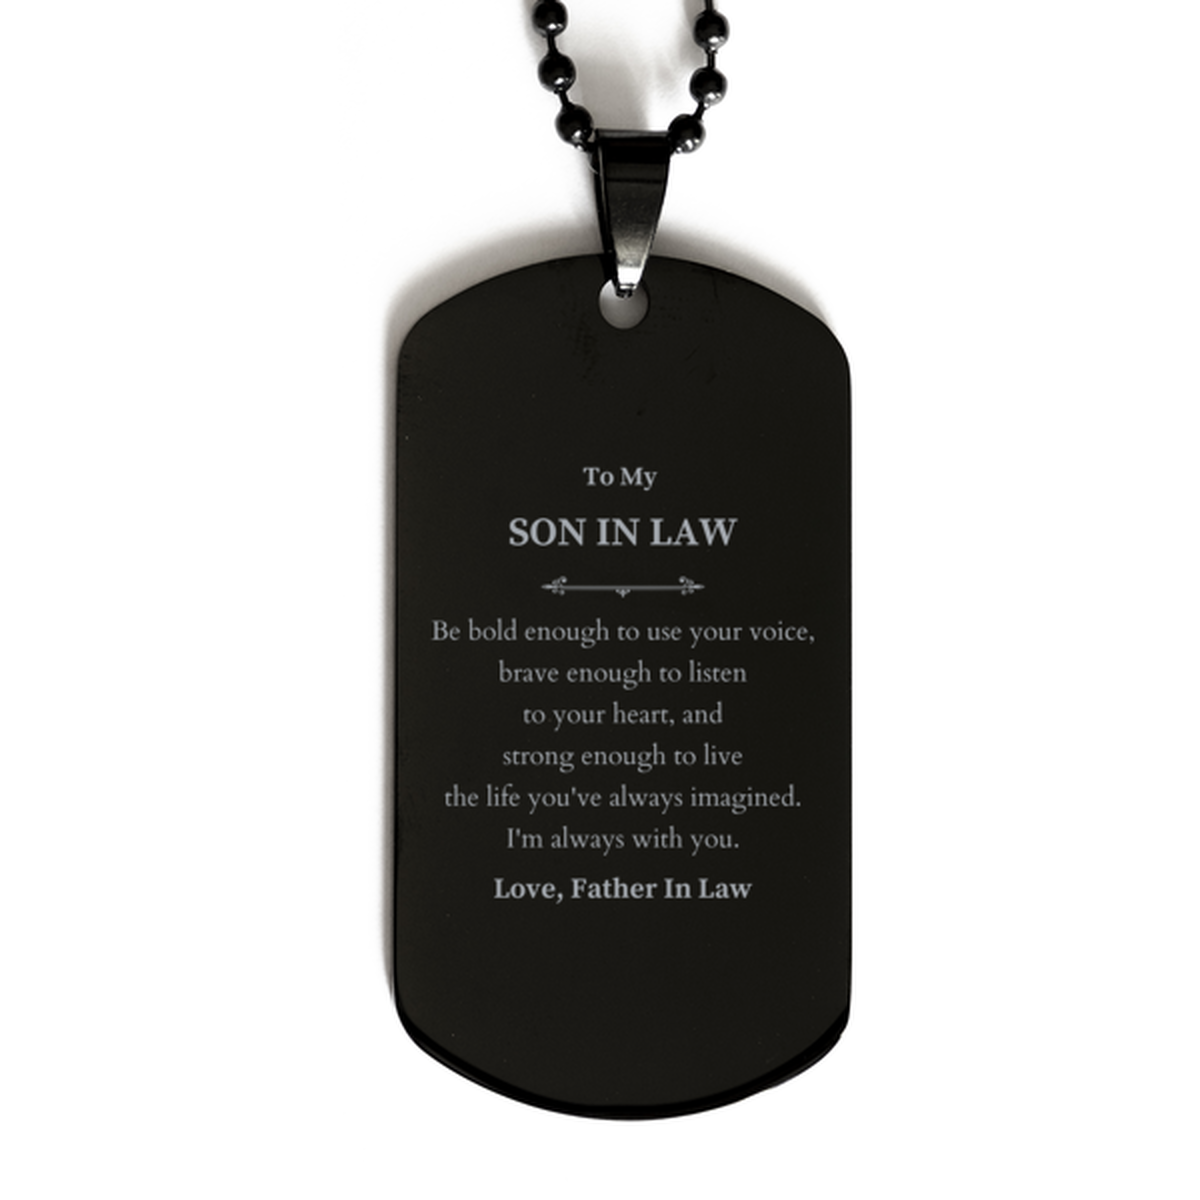 Keepsake Son In Law Black Dog Tag Gift Idea Graduation Christmas Birthday Son In Law from Father In Law, Son In Law Be bold enough to use your voice, brave enough to listen to your heart. Love, Father In Law